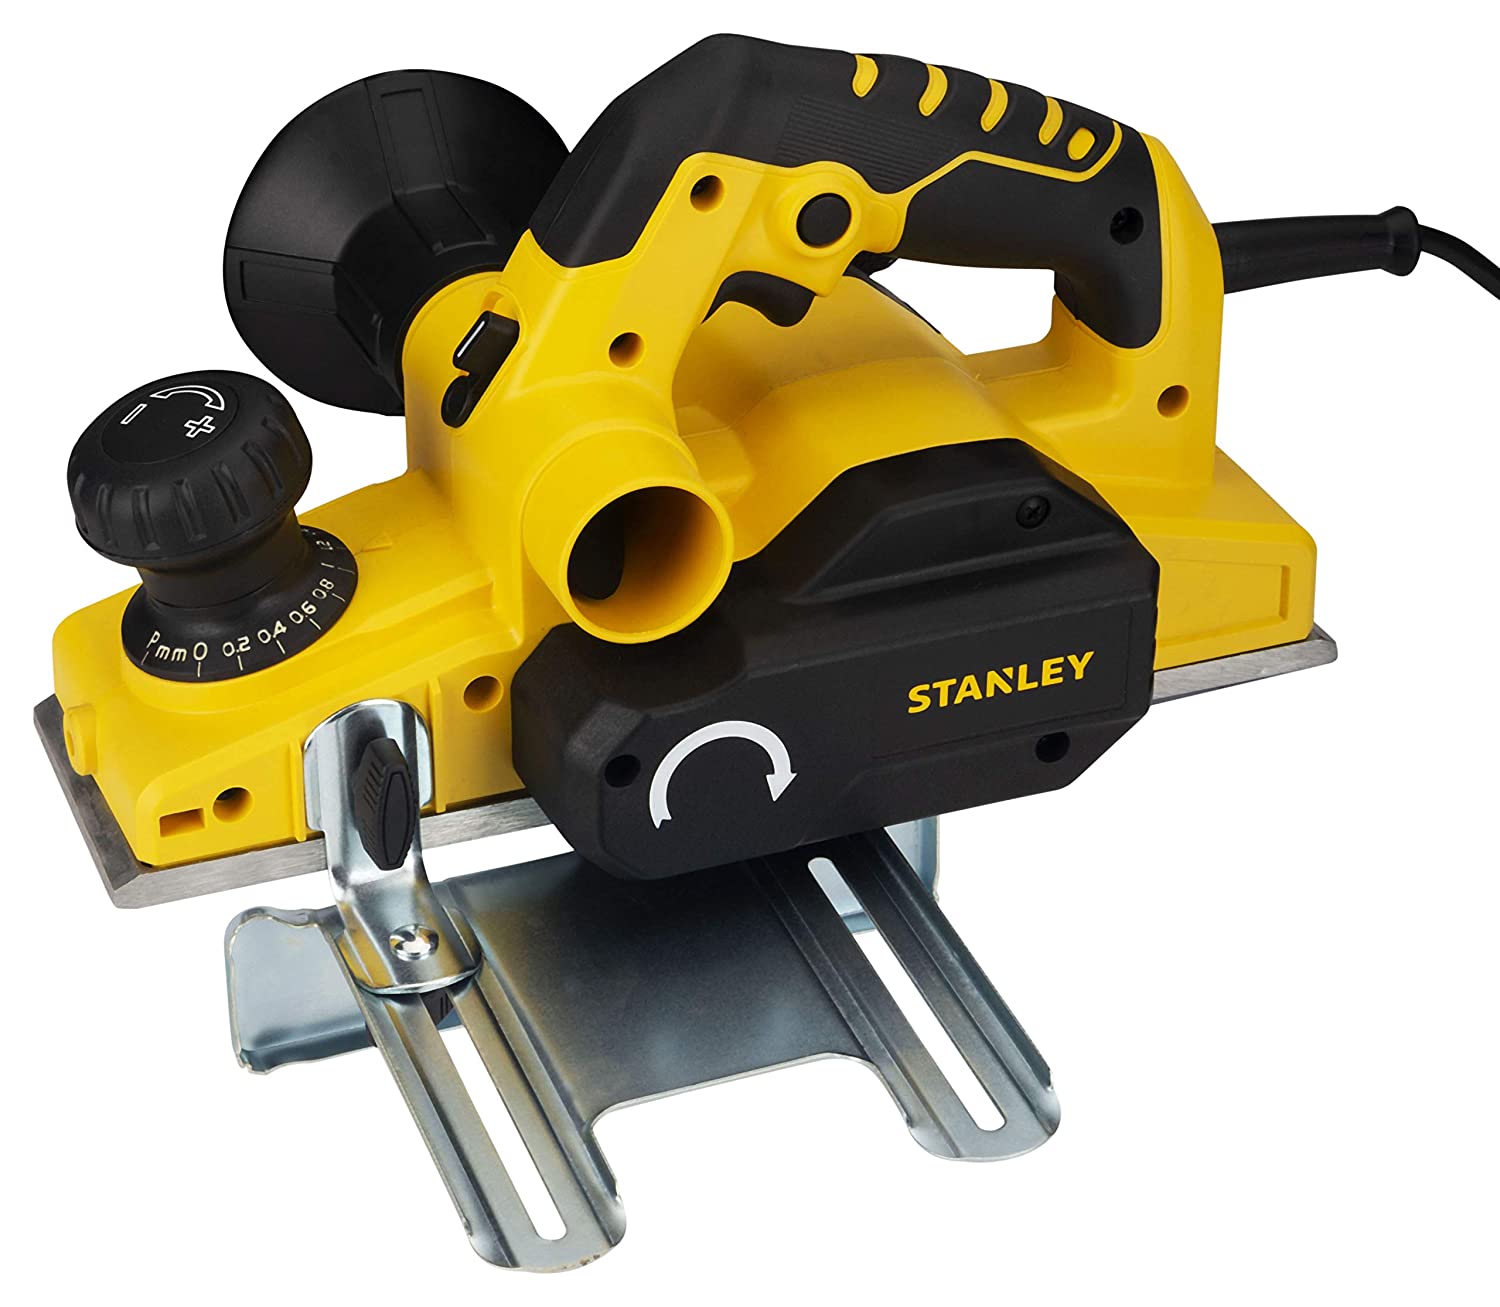 Stanley Planers Category